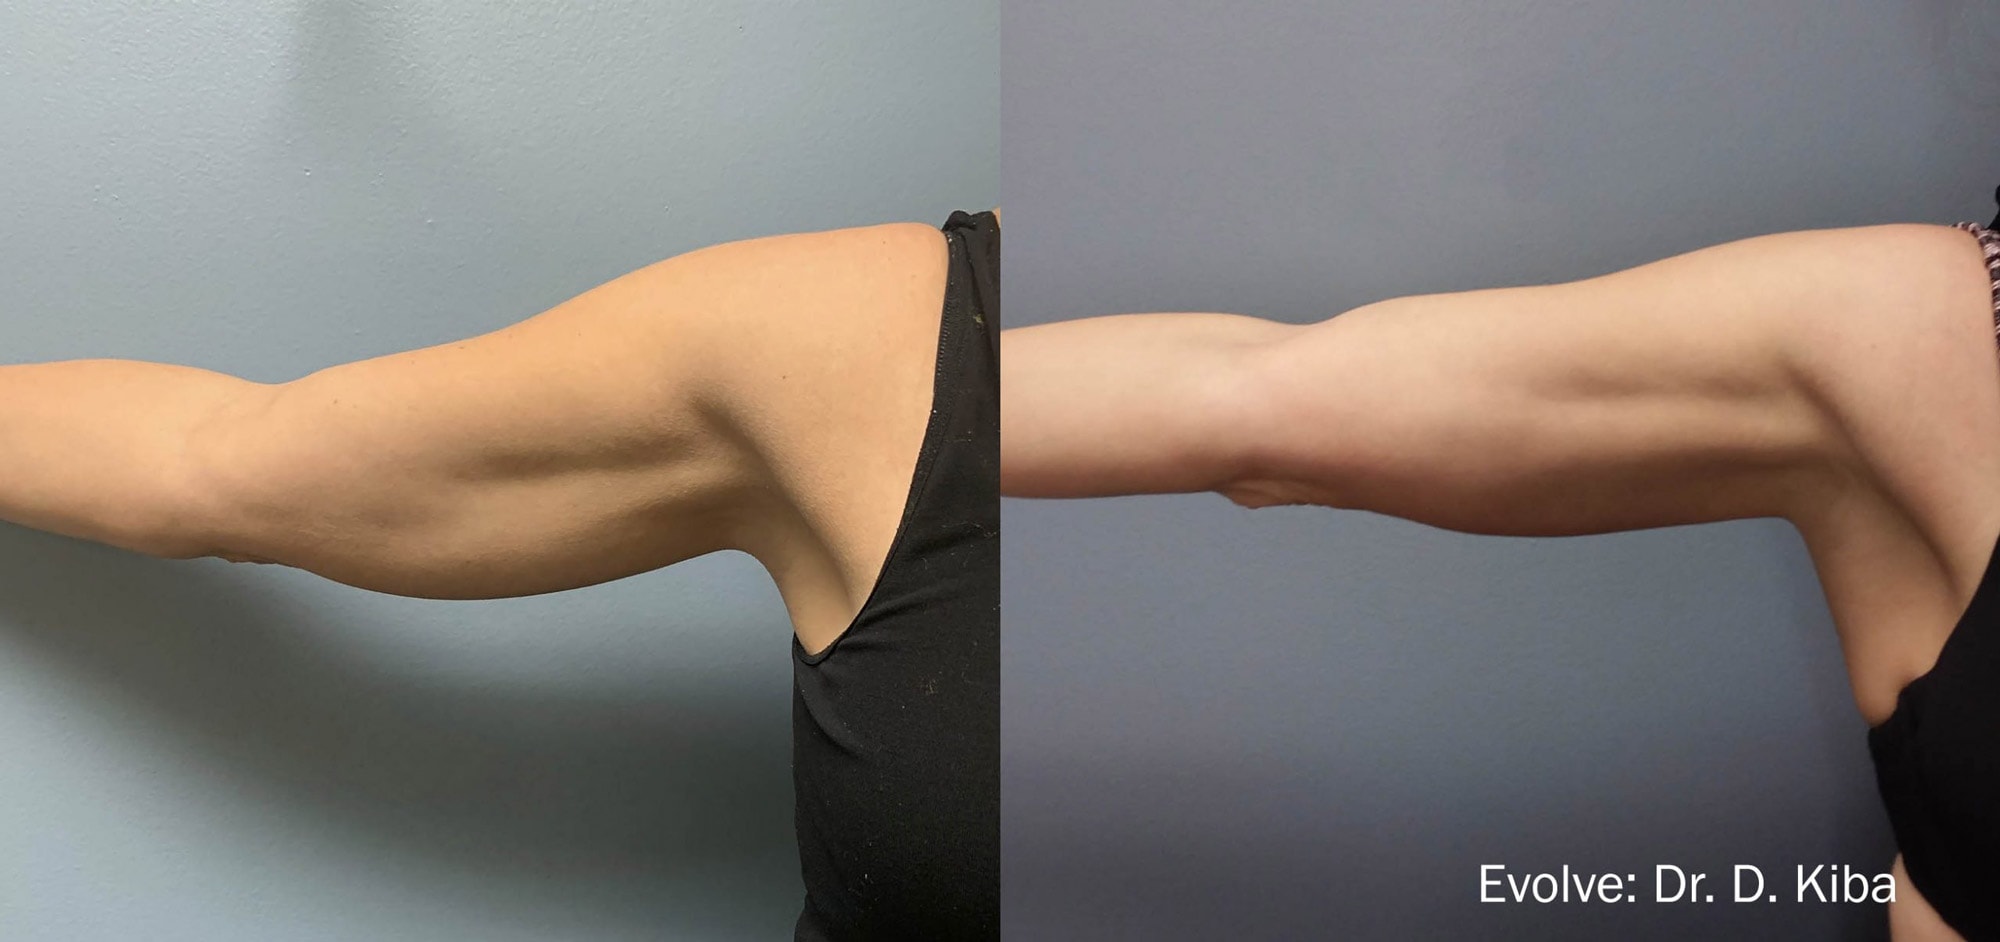 Before and After photos of Evolve X treatments reducing fat, tightening skin and contouring a woman’s arms